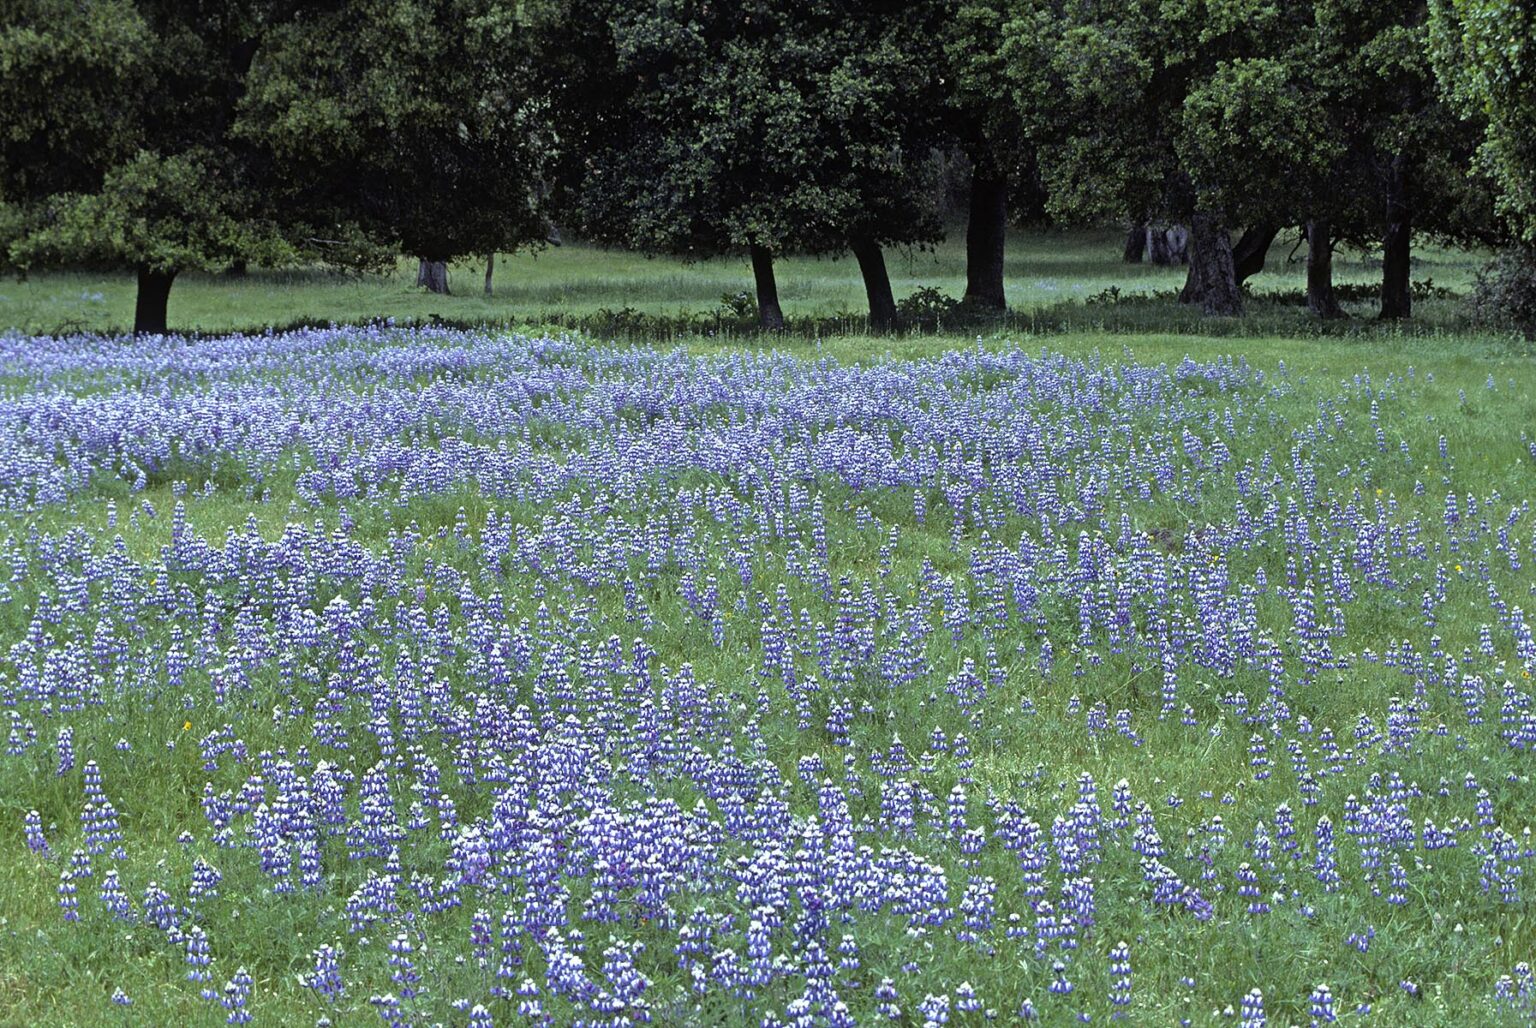 A pasture ofSKY LUPINE (Lupinus nanus) blooms in spring - CARMEL VALLEY, CALIFORNIA